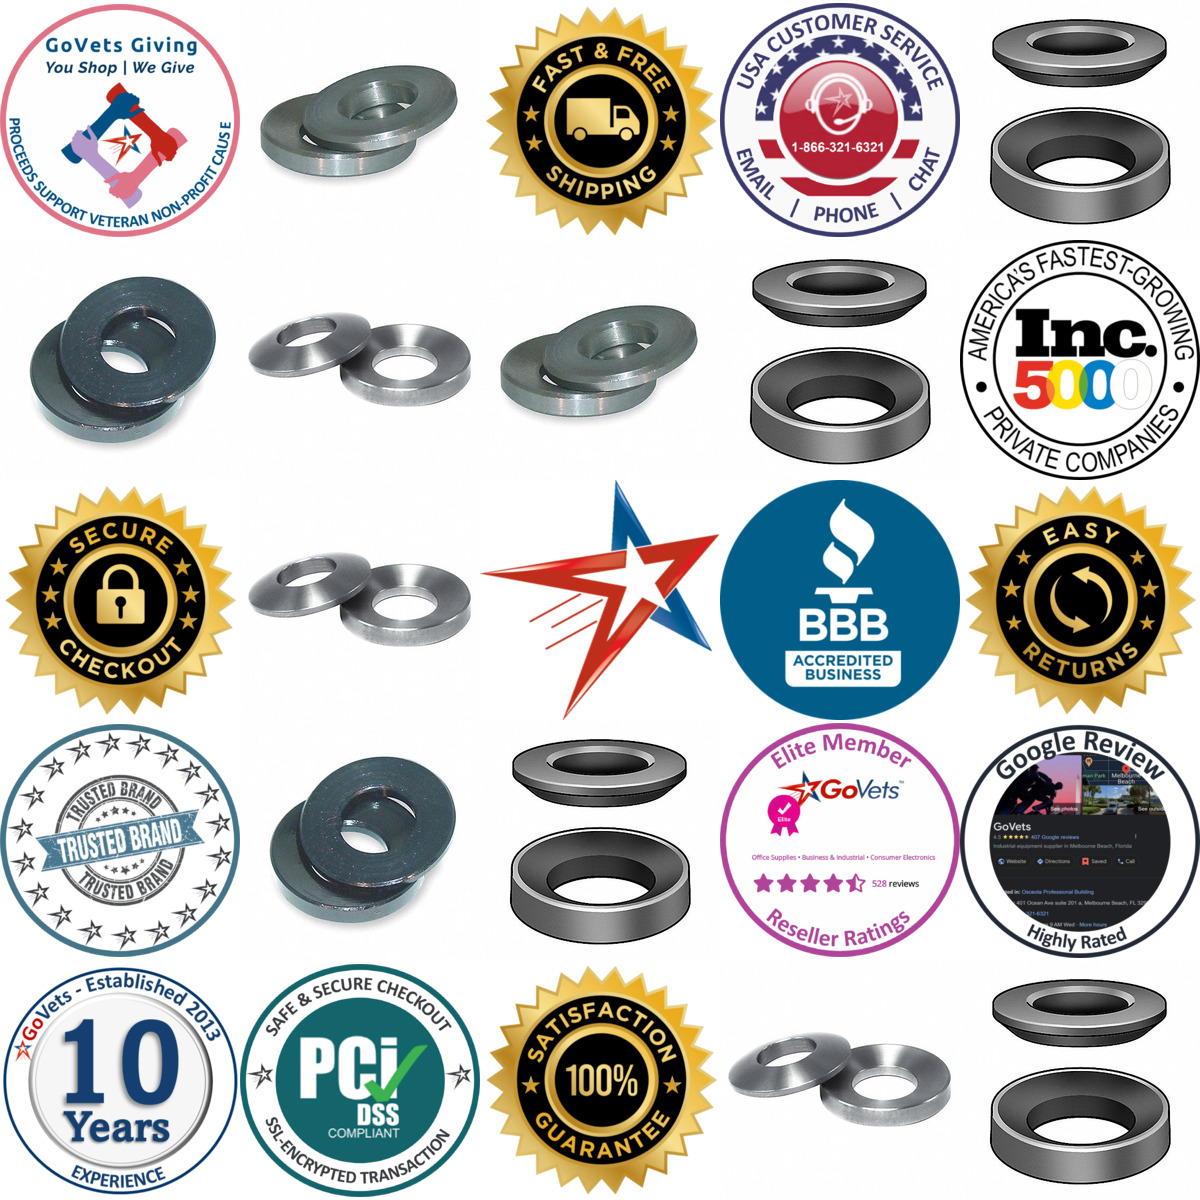 A selection of Spherical Washers and Assemblies products on GoVets